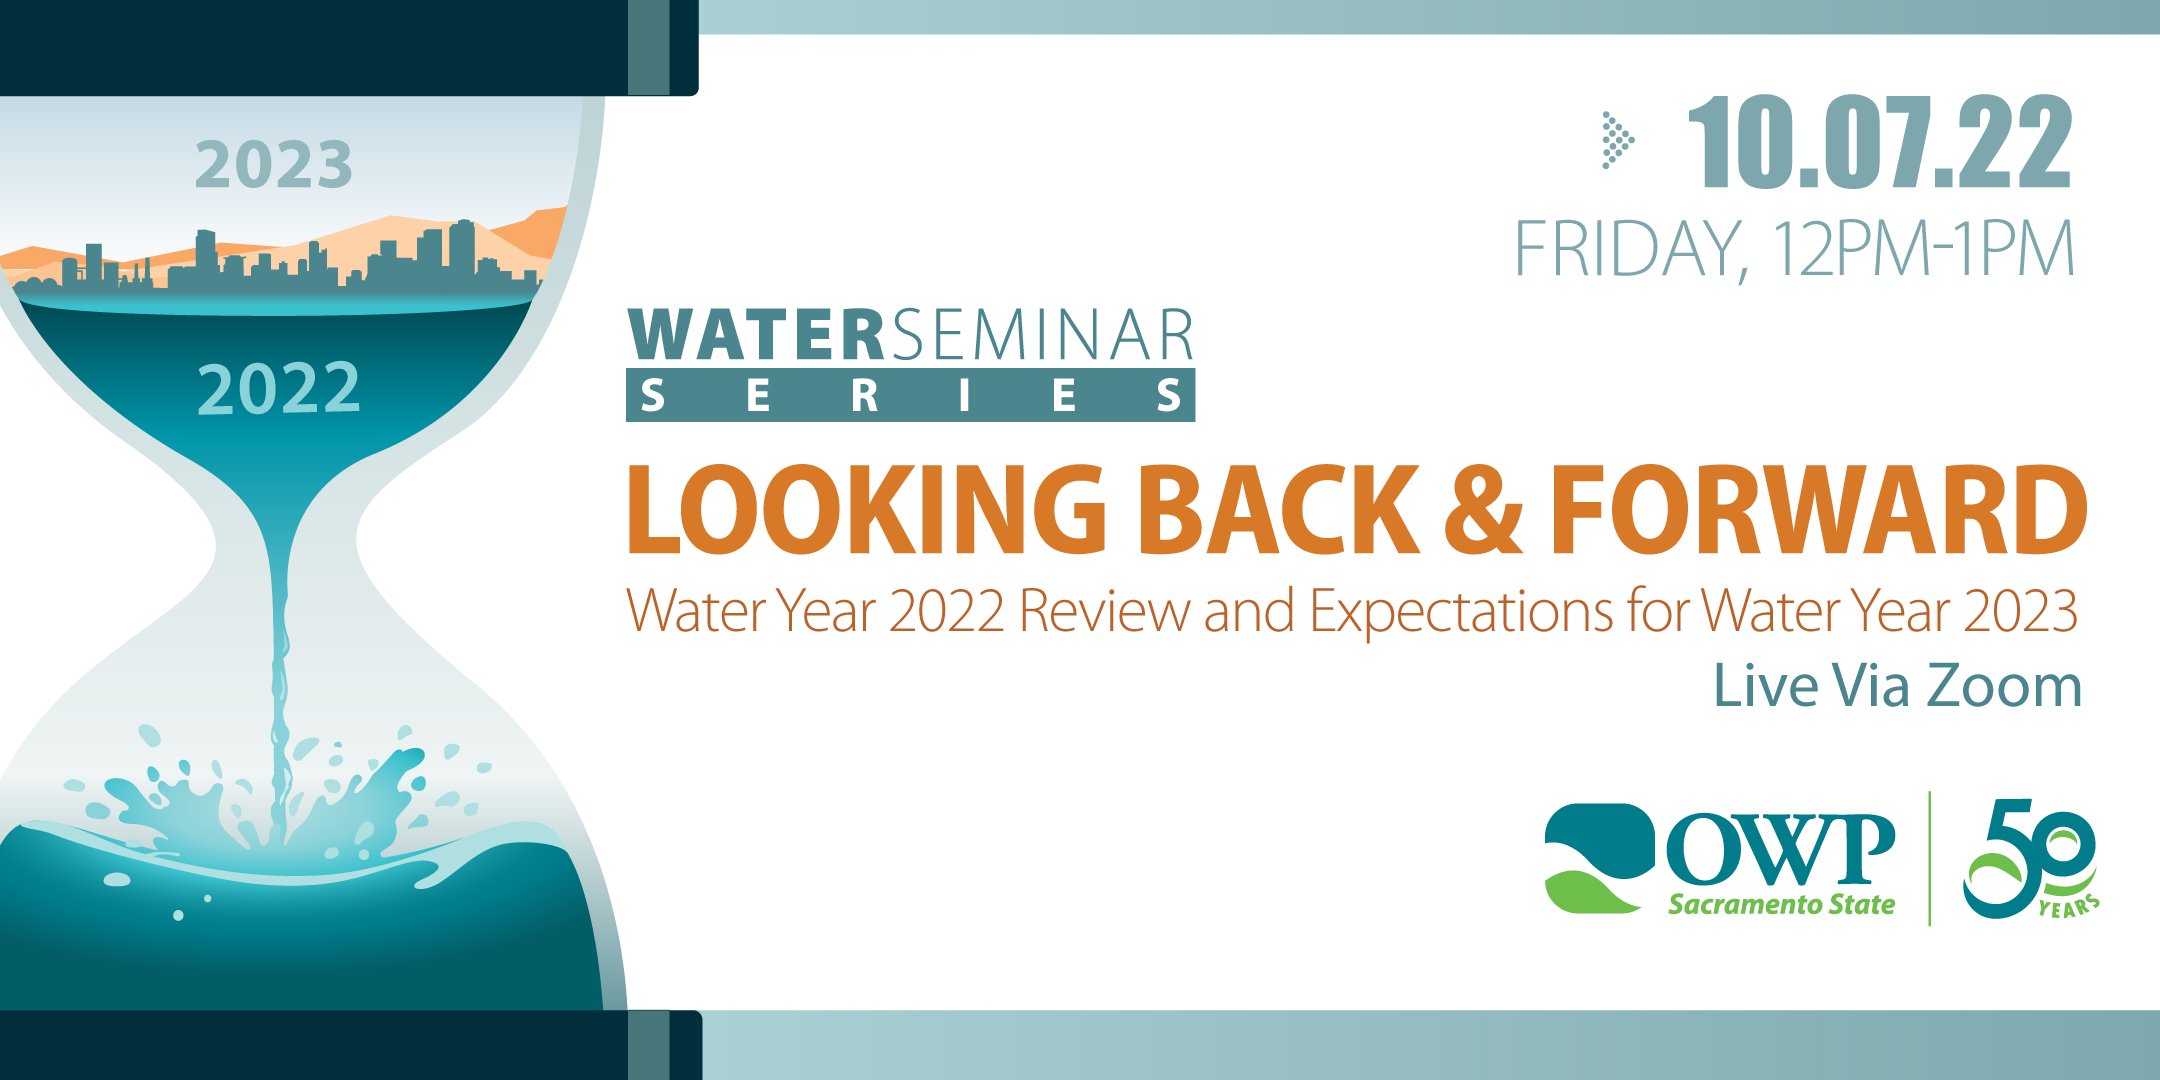 Water Seminar October 7, 2022, Looking Back and Forward: A Water Year 2022 Review and Expectations for Water Year 2023